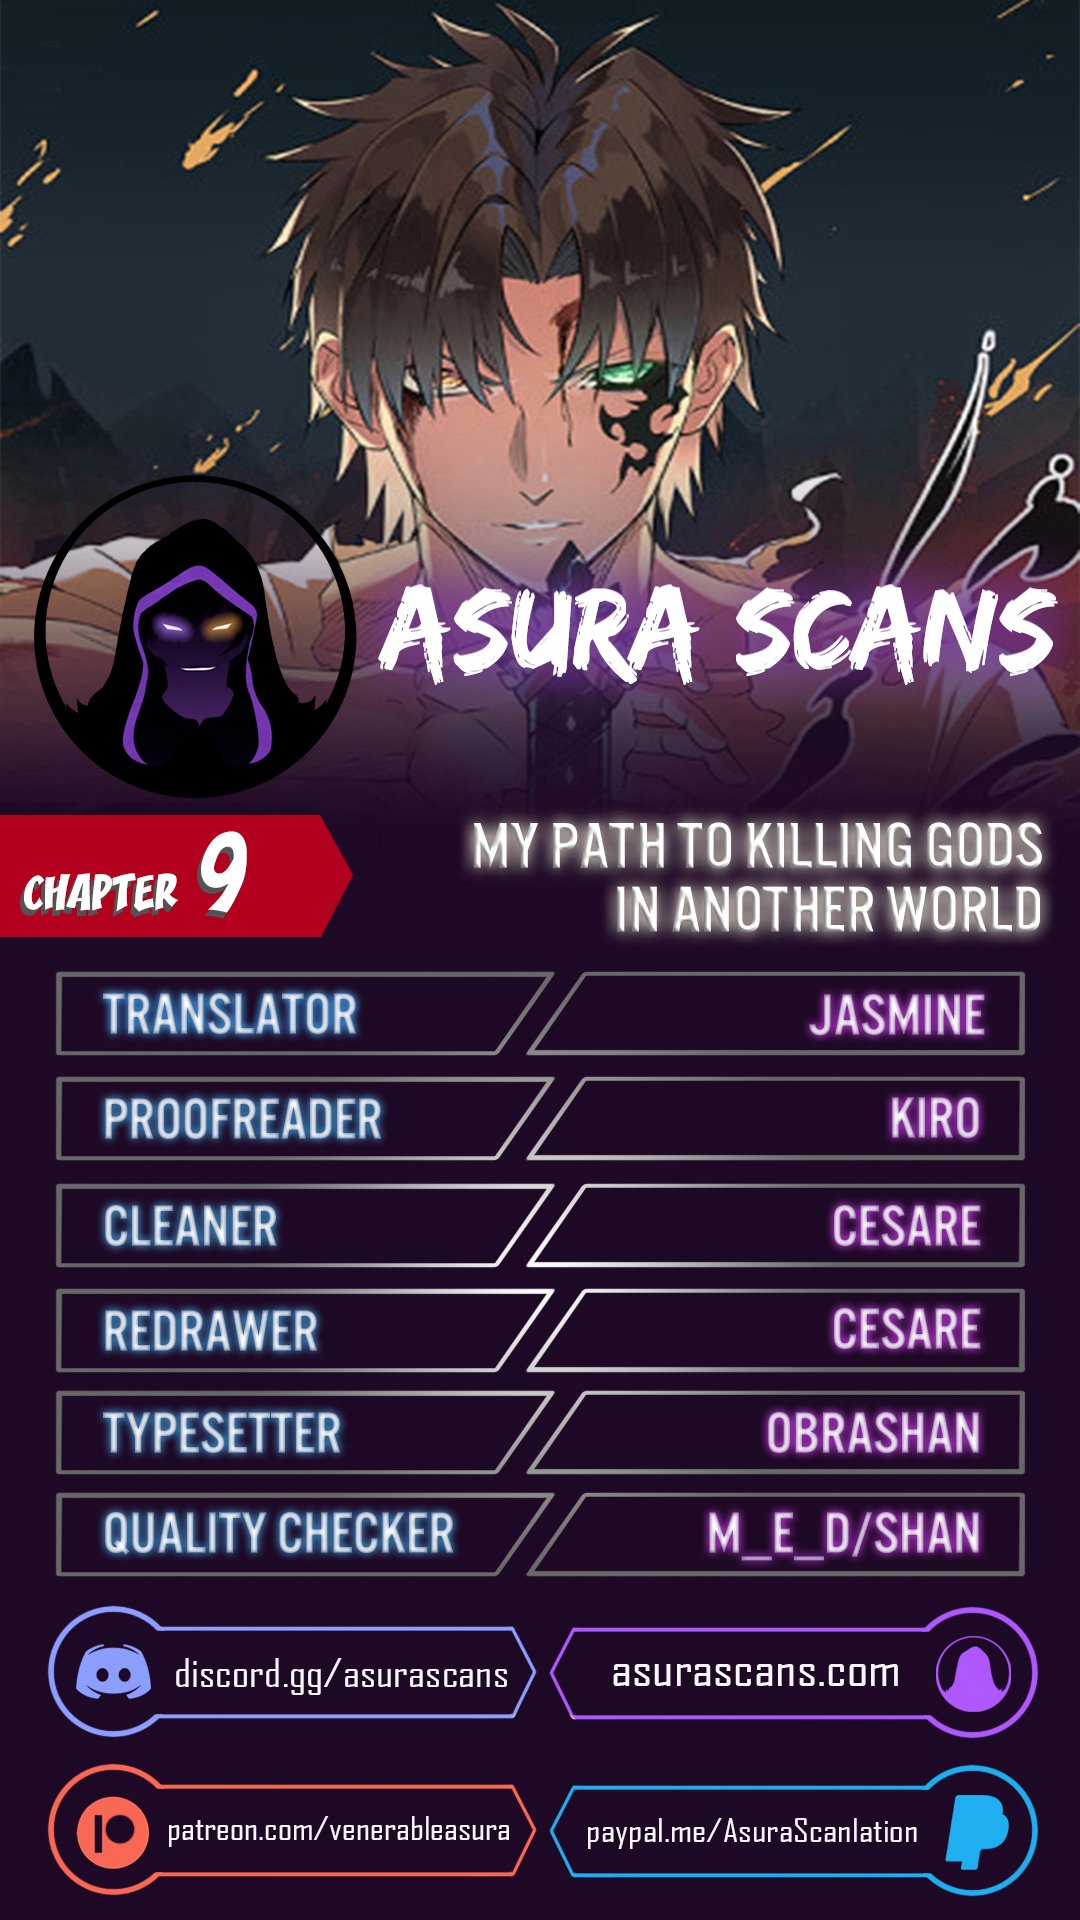 My Path to Killing Gods in Another World - Chapter 23160 - Image 1